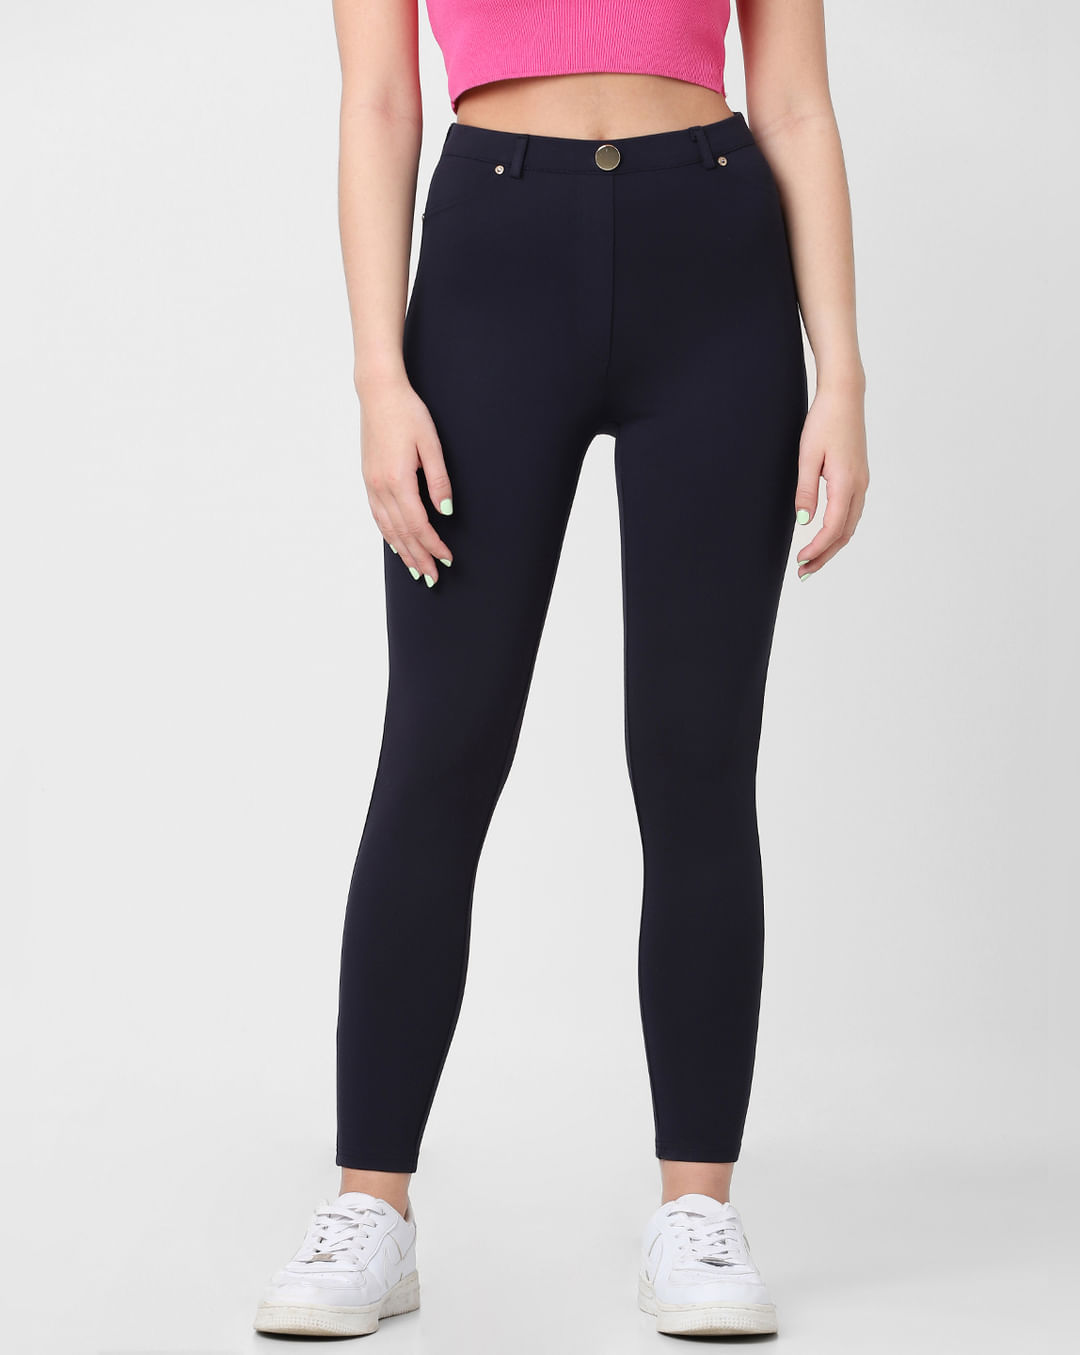 Paragon Legging (Navy)  Sports leggings outfit, Athleisure outfits, Sports  leggings